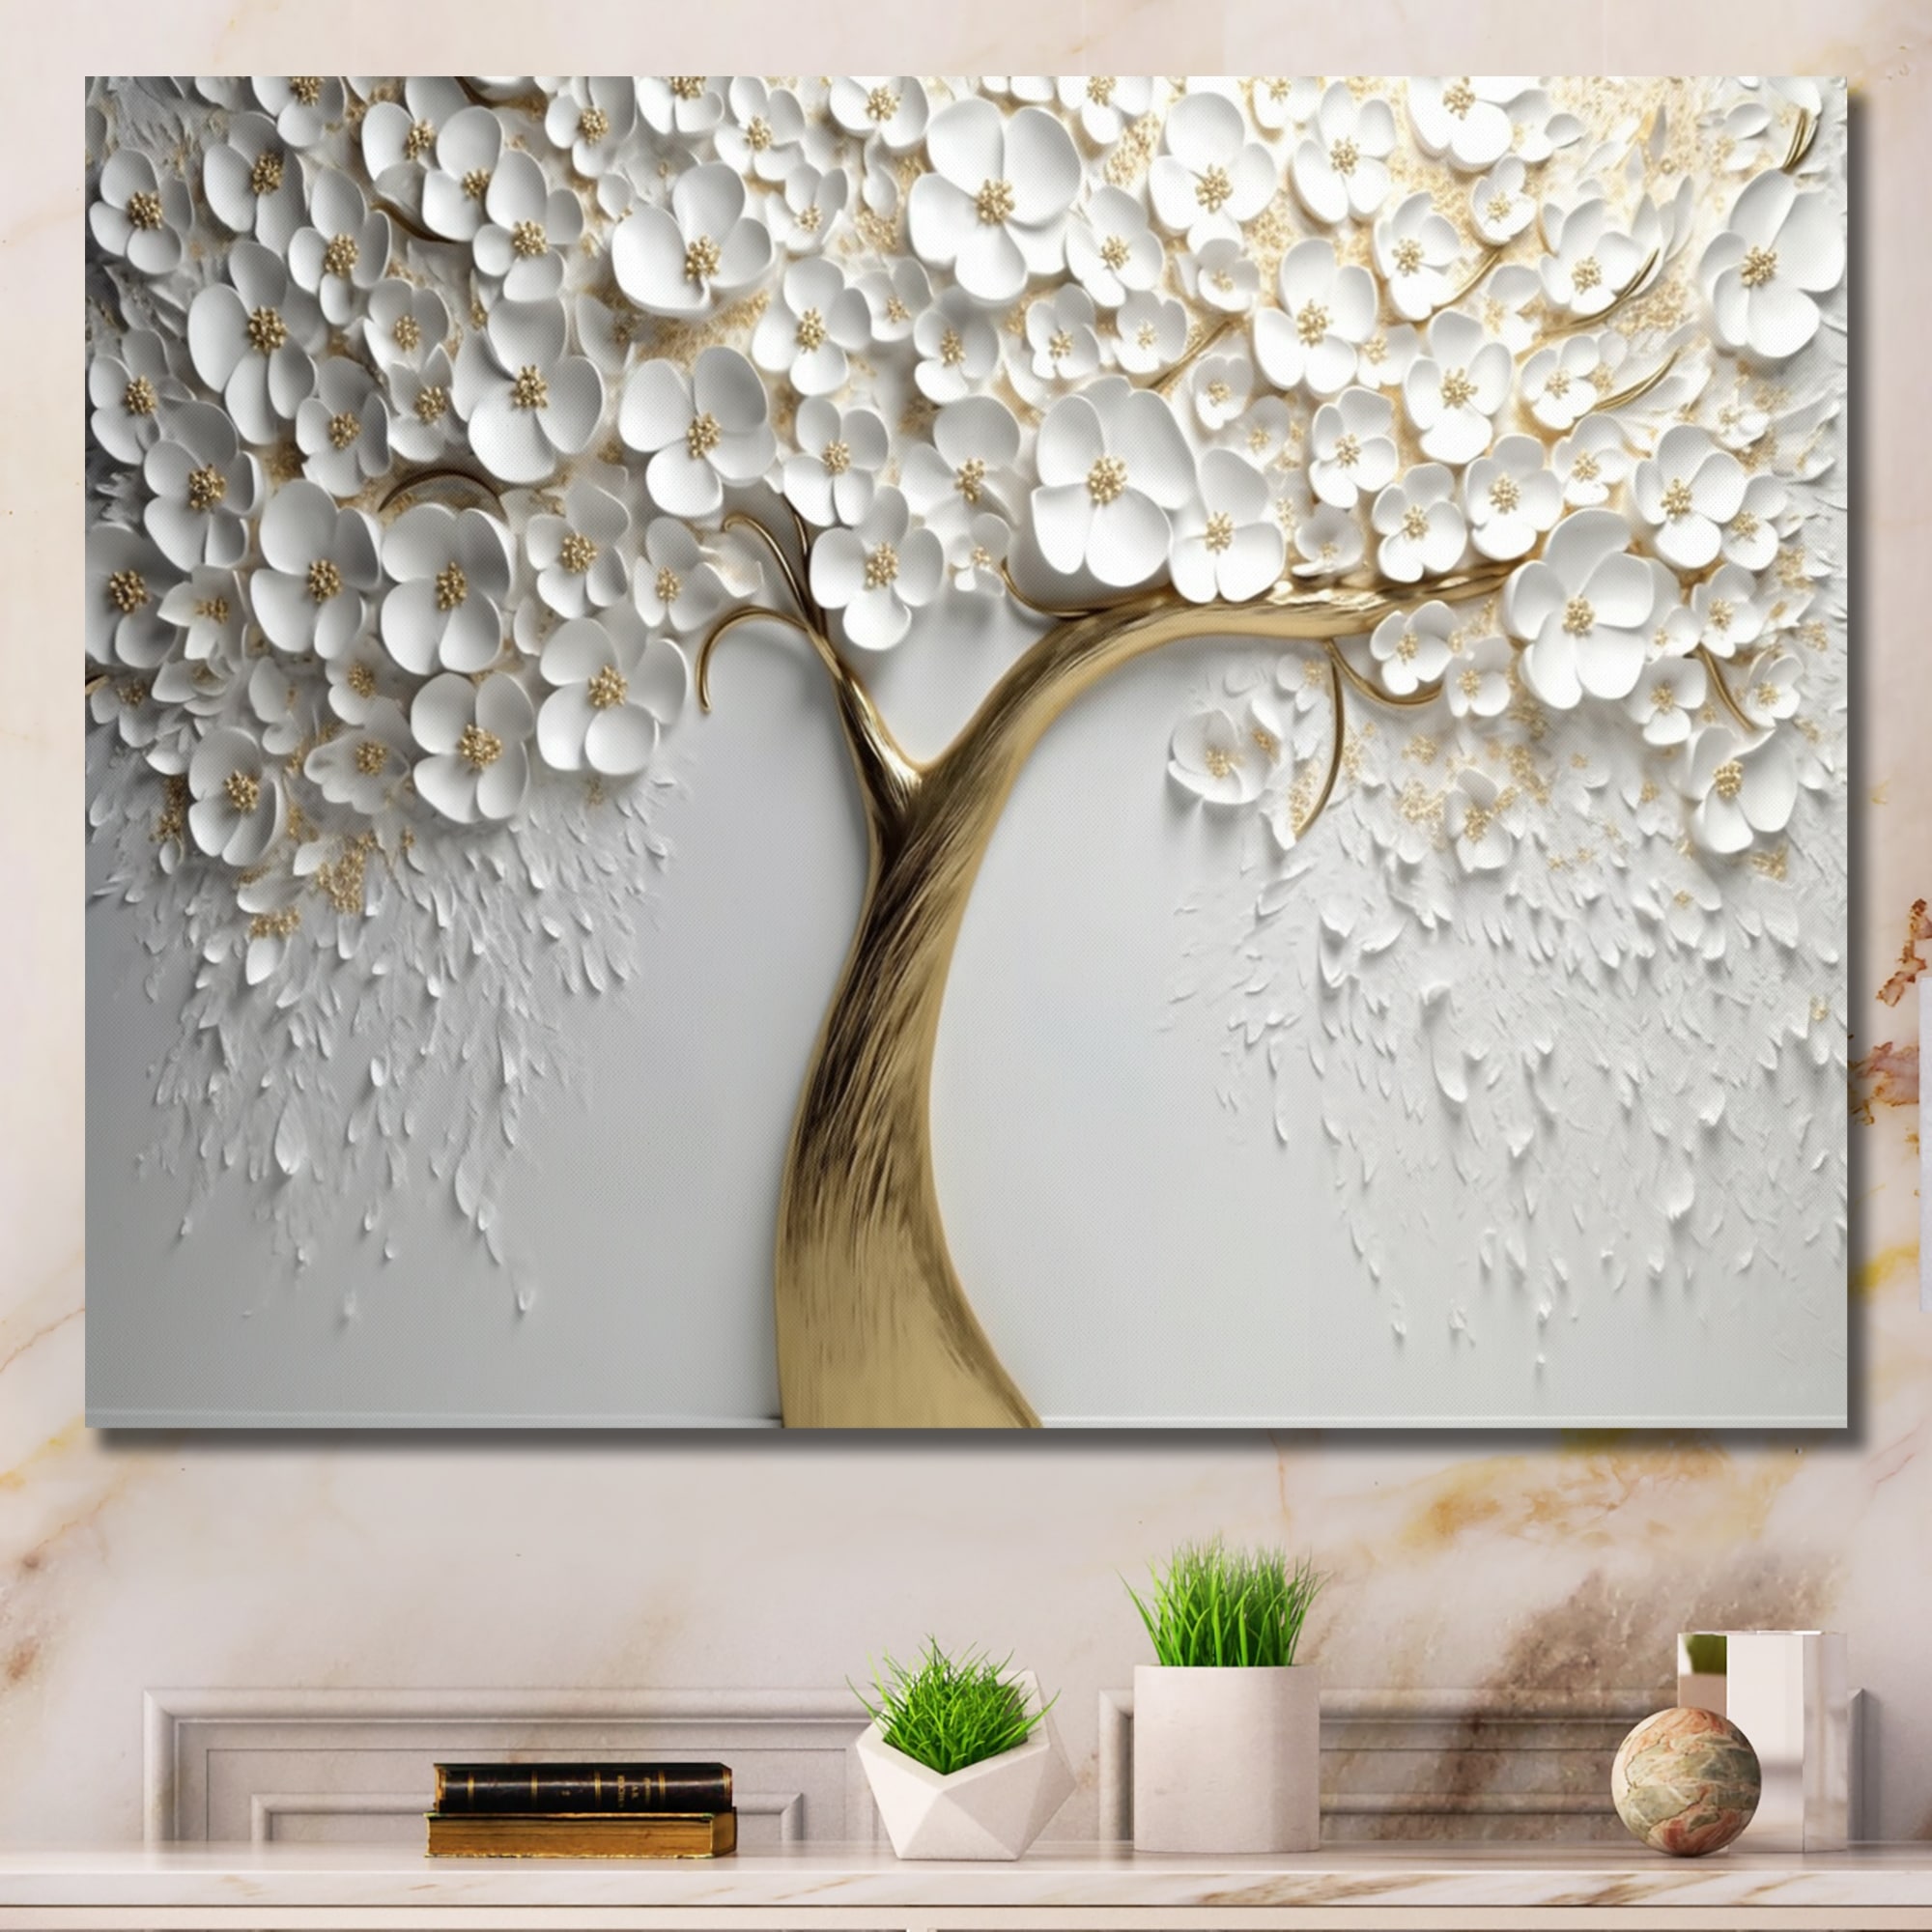 Hand Painted Canvas Oil Painting Cuadros Grandes Modern Abstract Salon Bar  Home Bedroom Wall Art Decorationmural